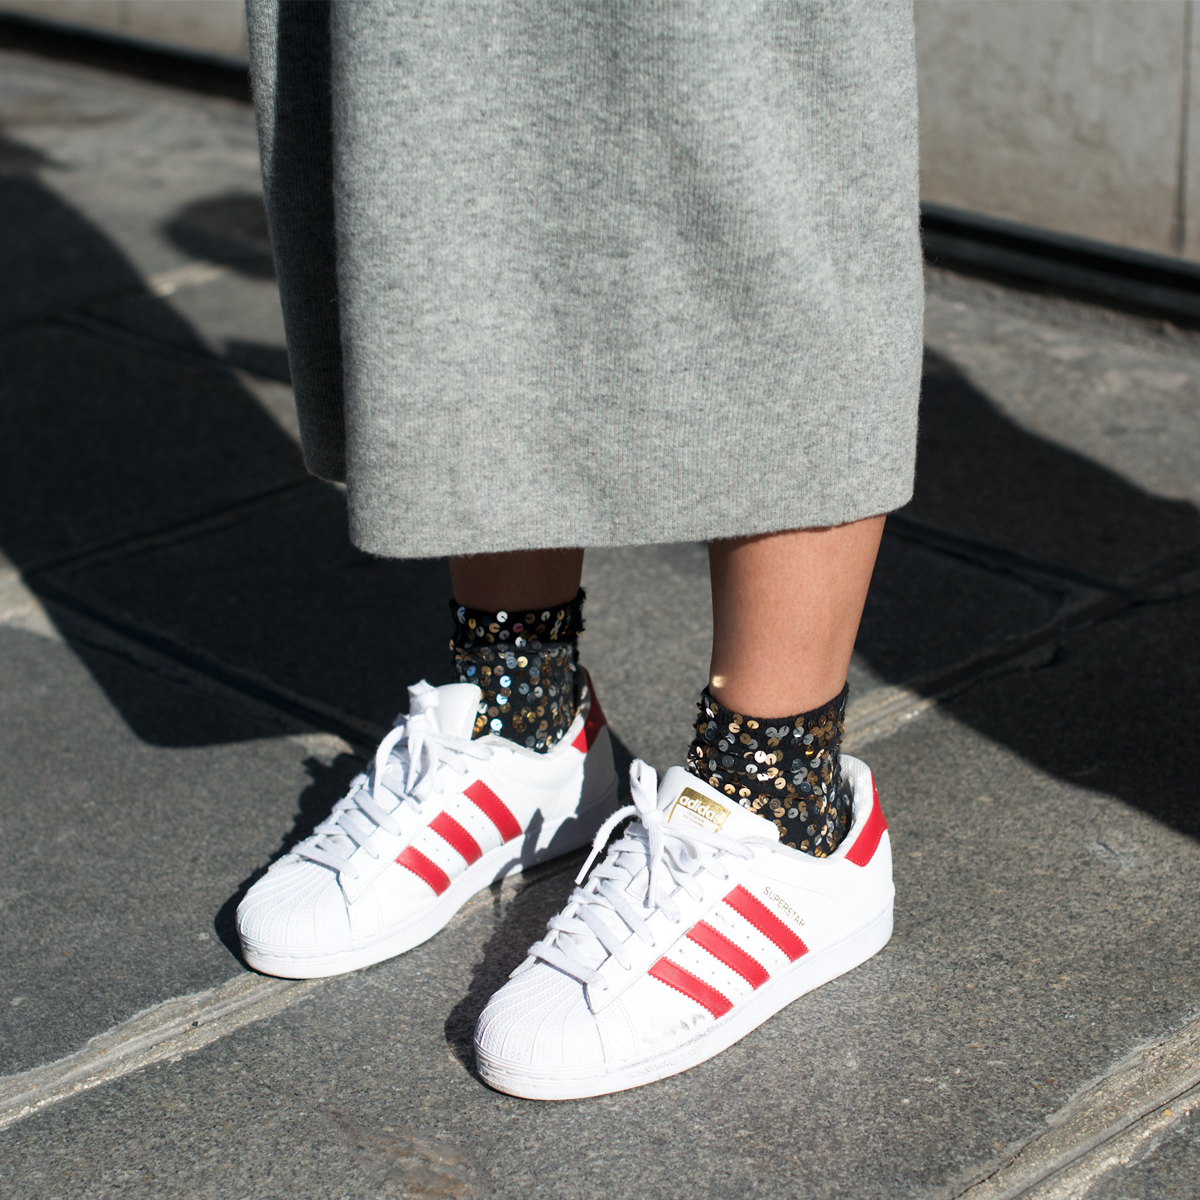 Buy Adidas Originals Women's SUPERSTAR XLG White Casual Sneakers for Women  at Best Price @ Tata CLiQ